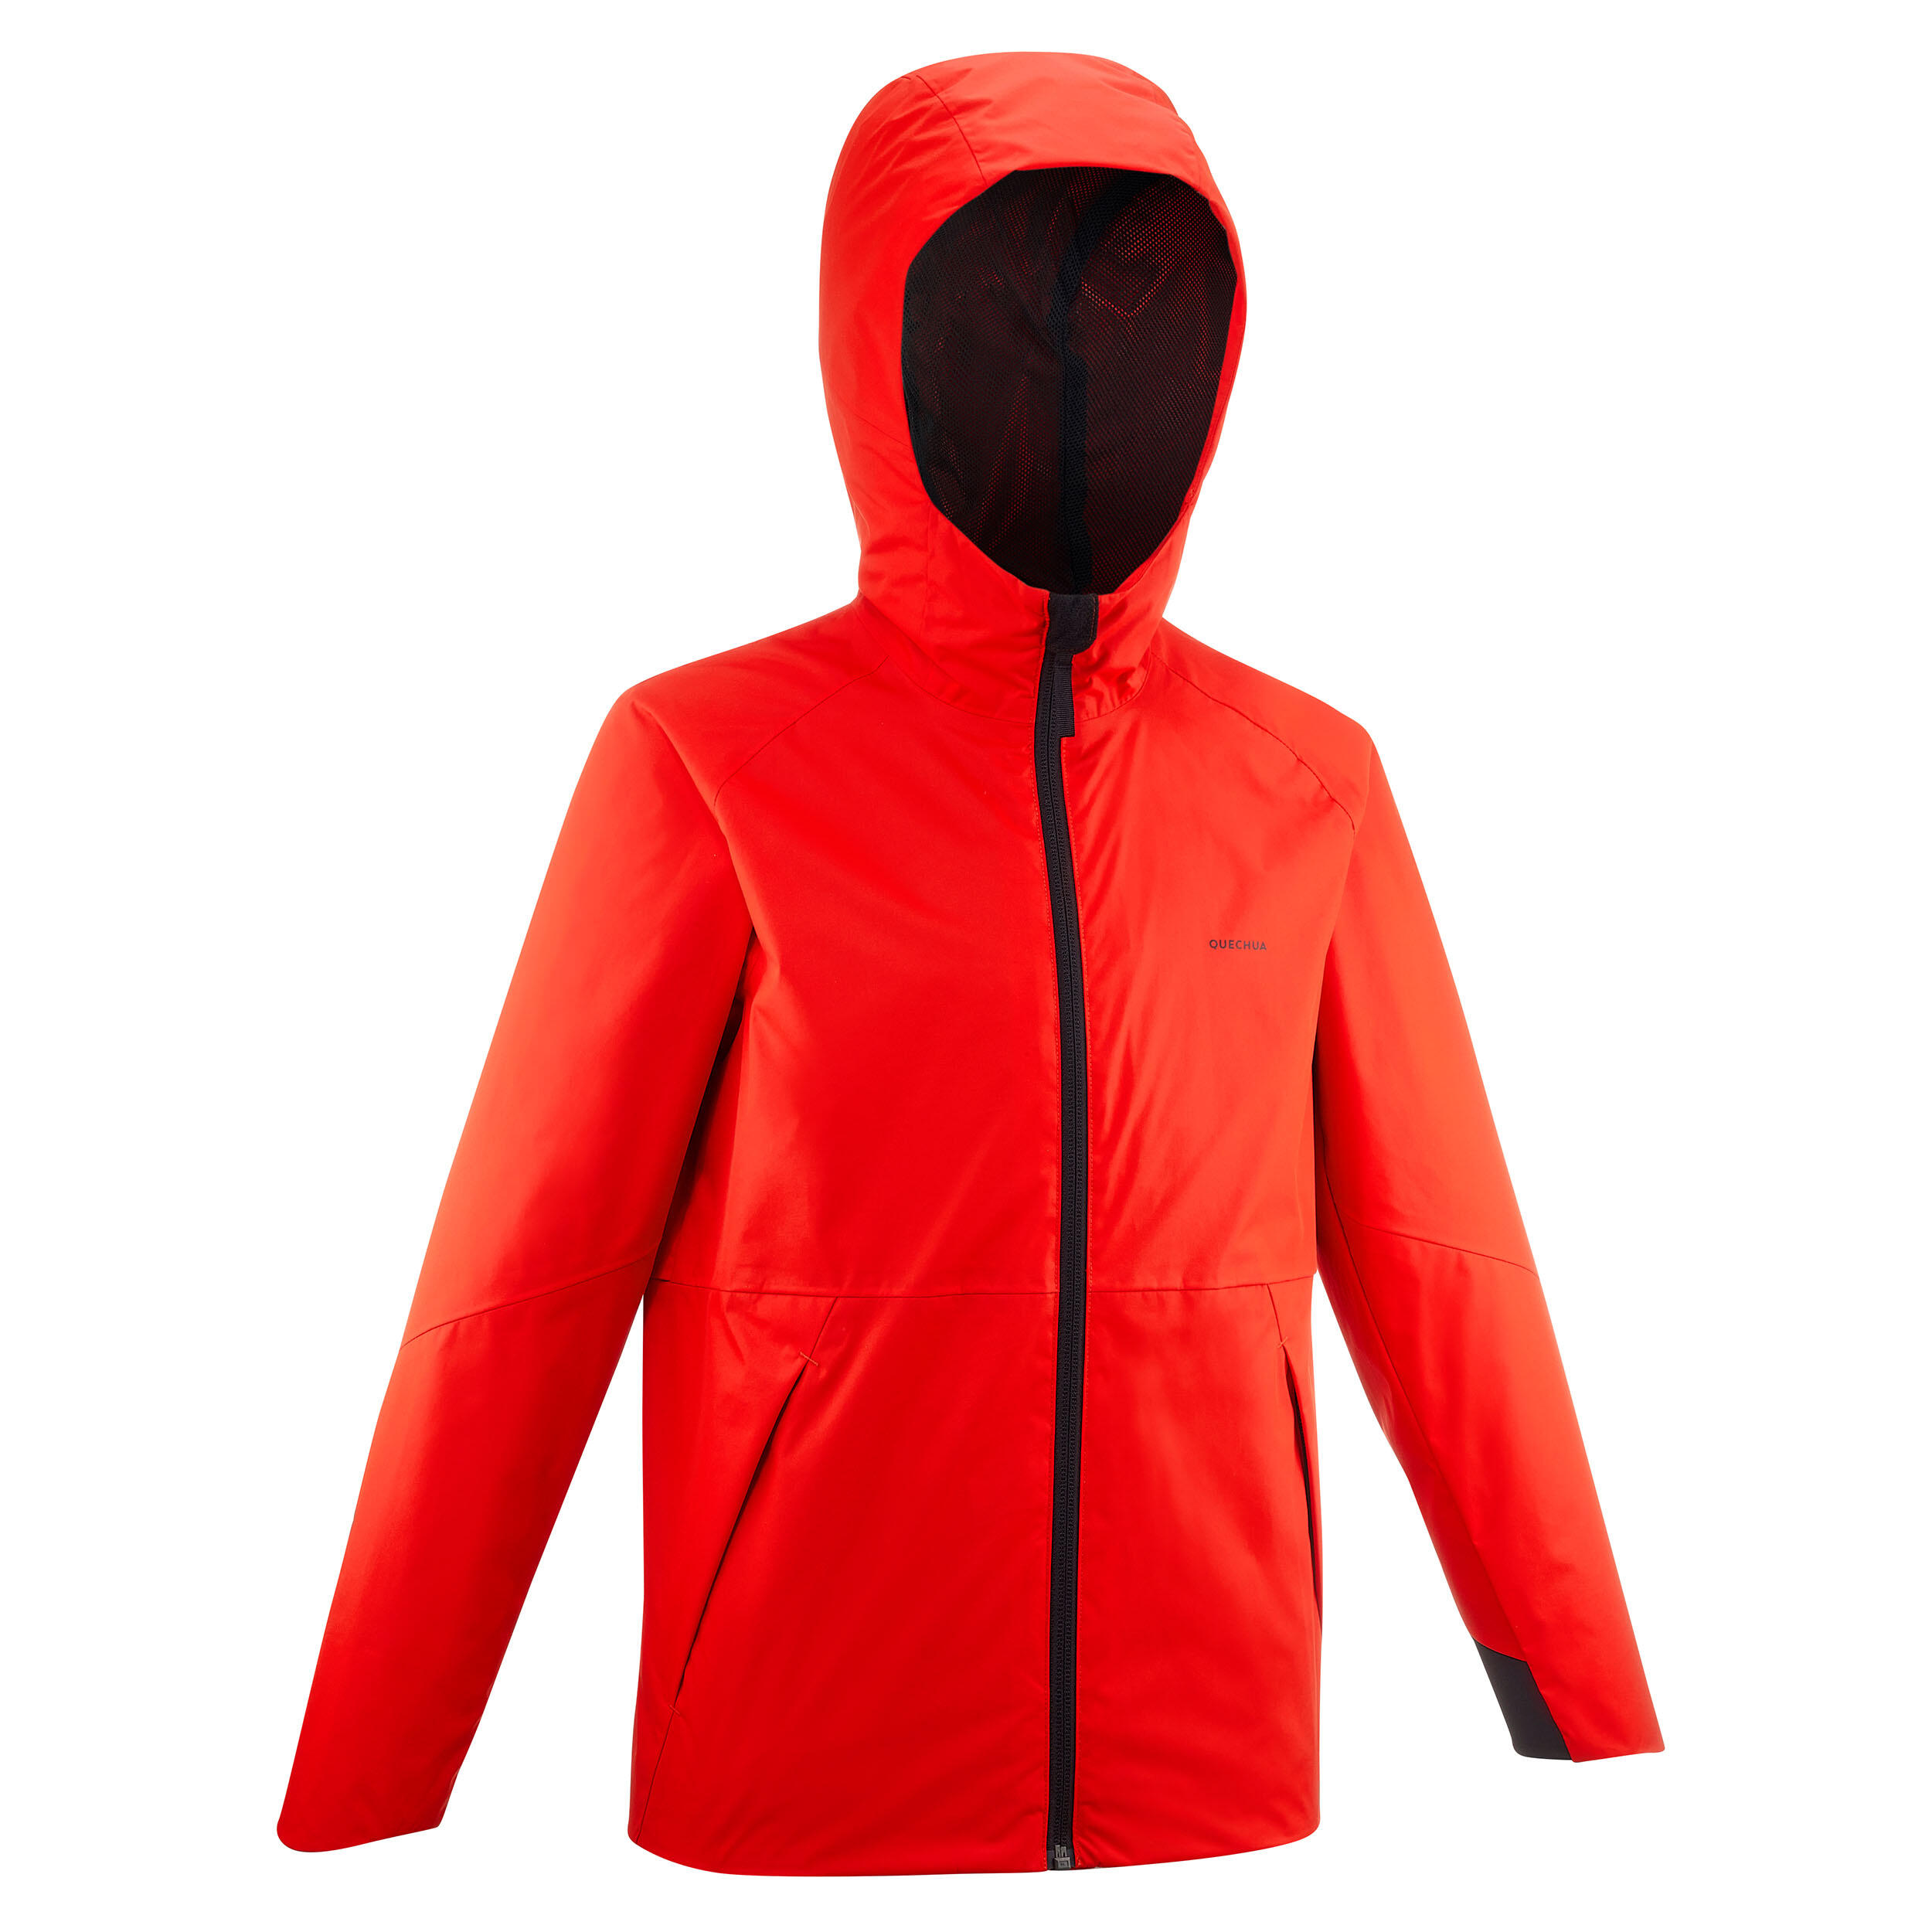 QUECHUA Kids’ Waterproof Hiking Jacket - MH500 Aged 7-15 - Red